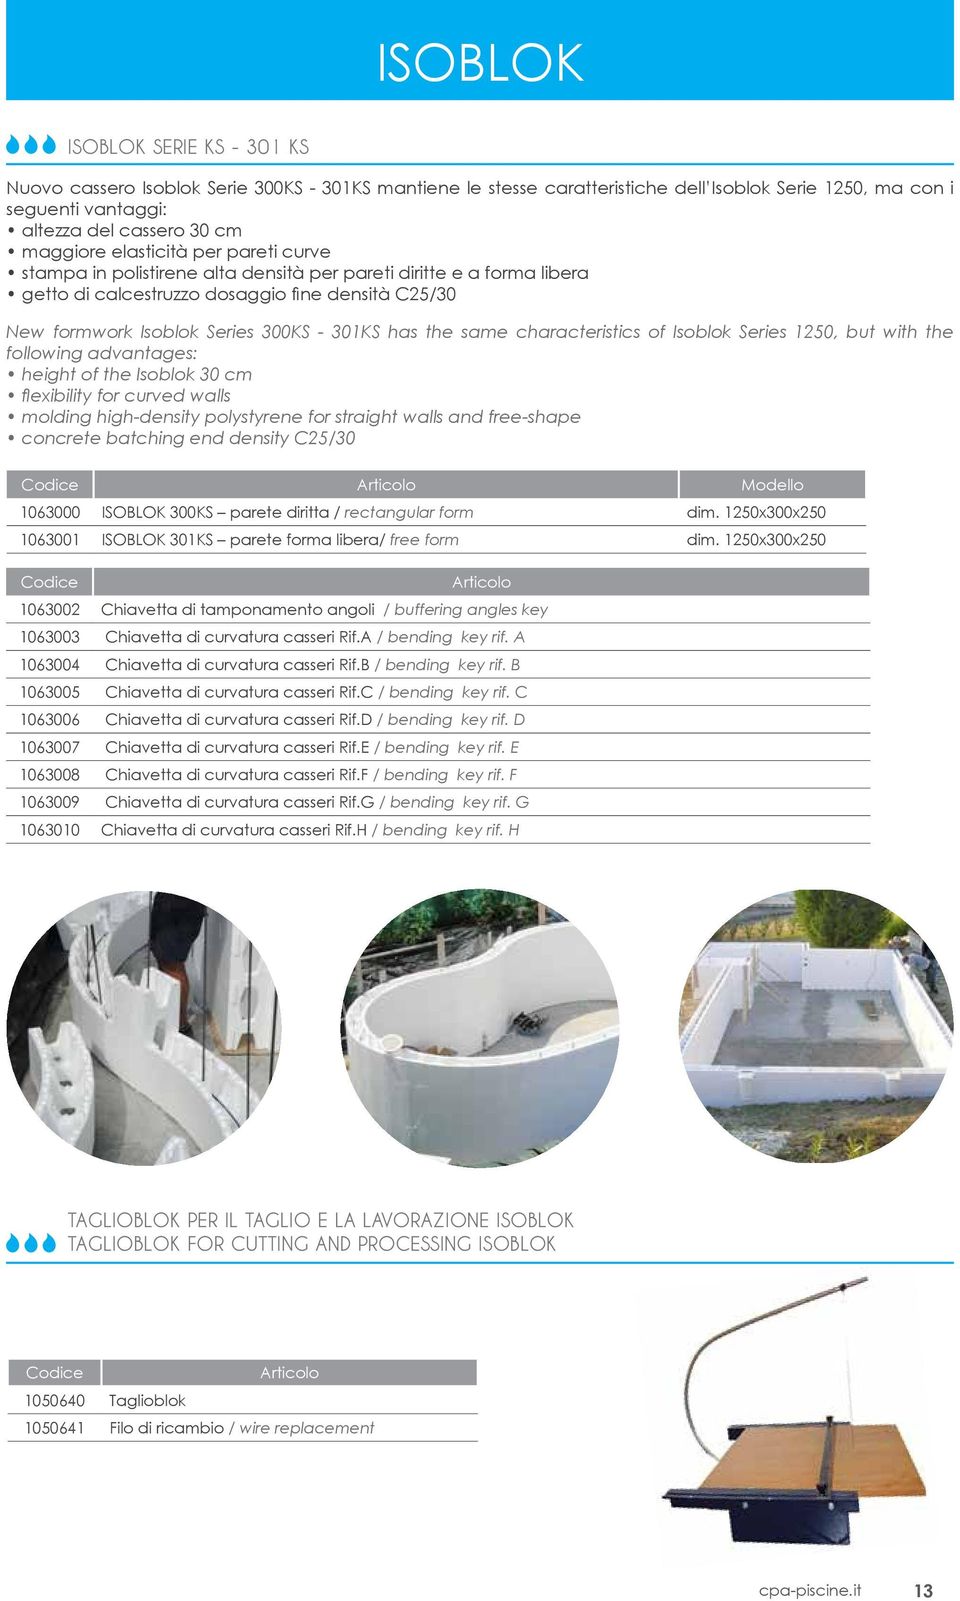 same characteristics of Isoblok Series 1250, but with the following advantages: height of the Isoblok 30 cm flexibility for curved walls molding high-density polystyrene for straight walls and